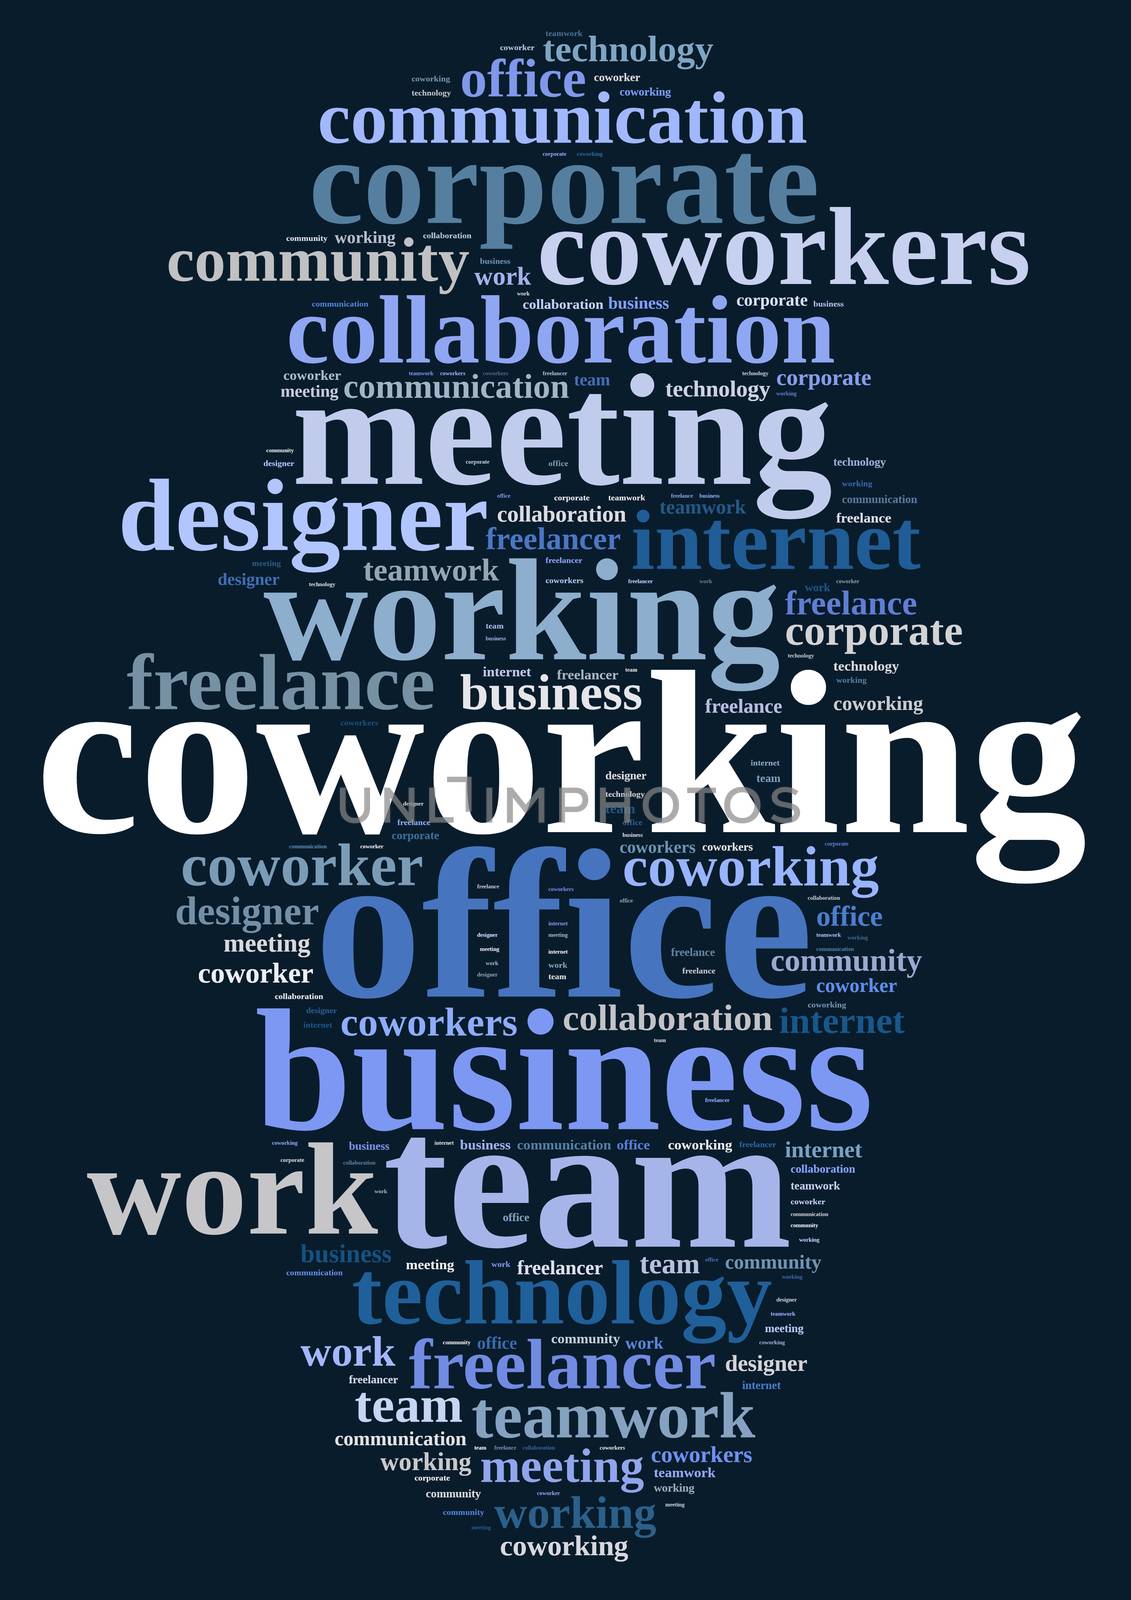 Illustration with word cloud with the word coworking.